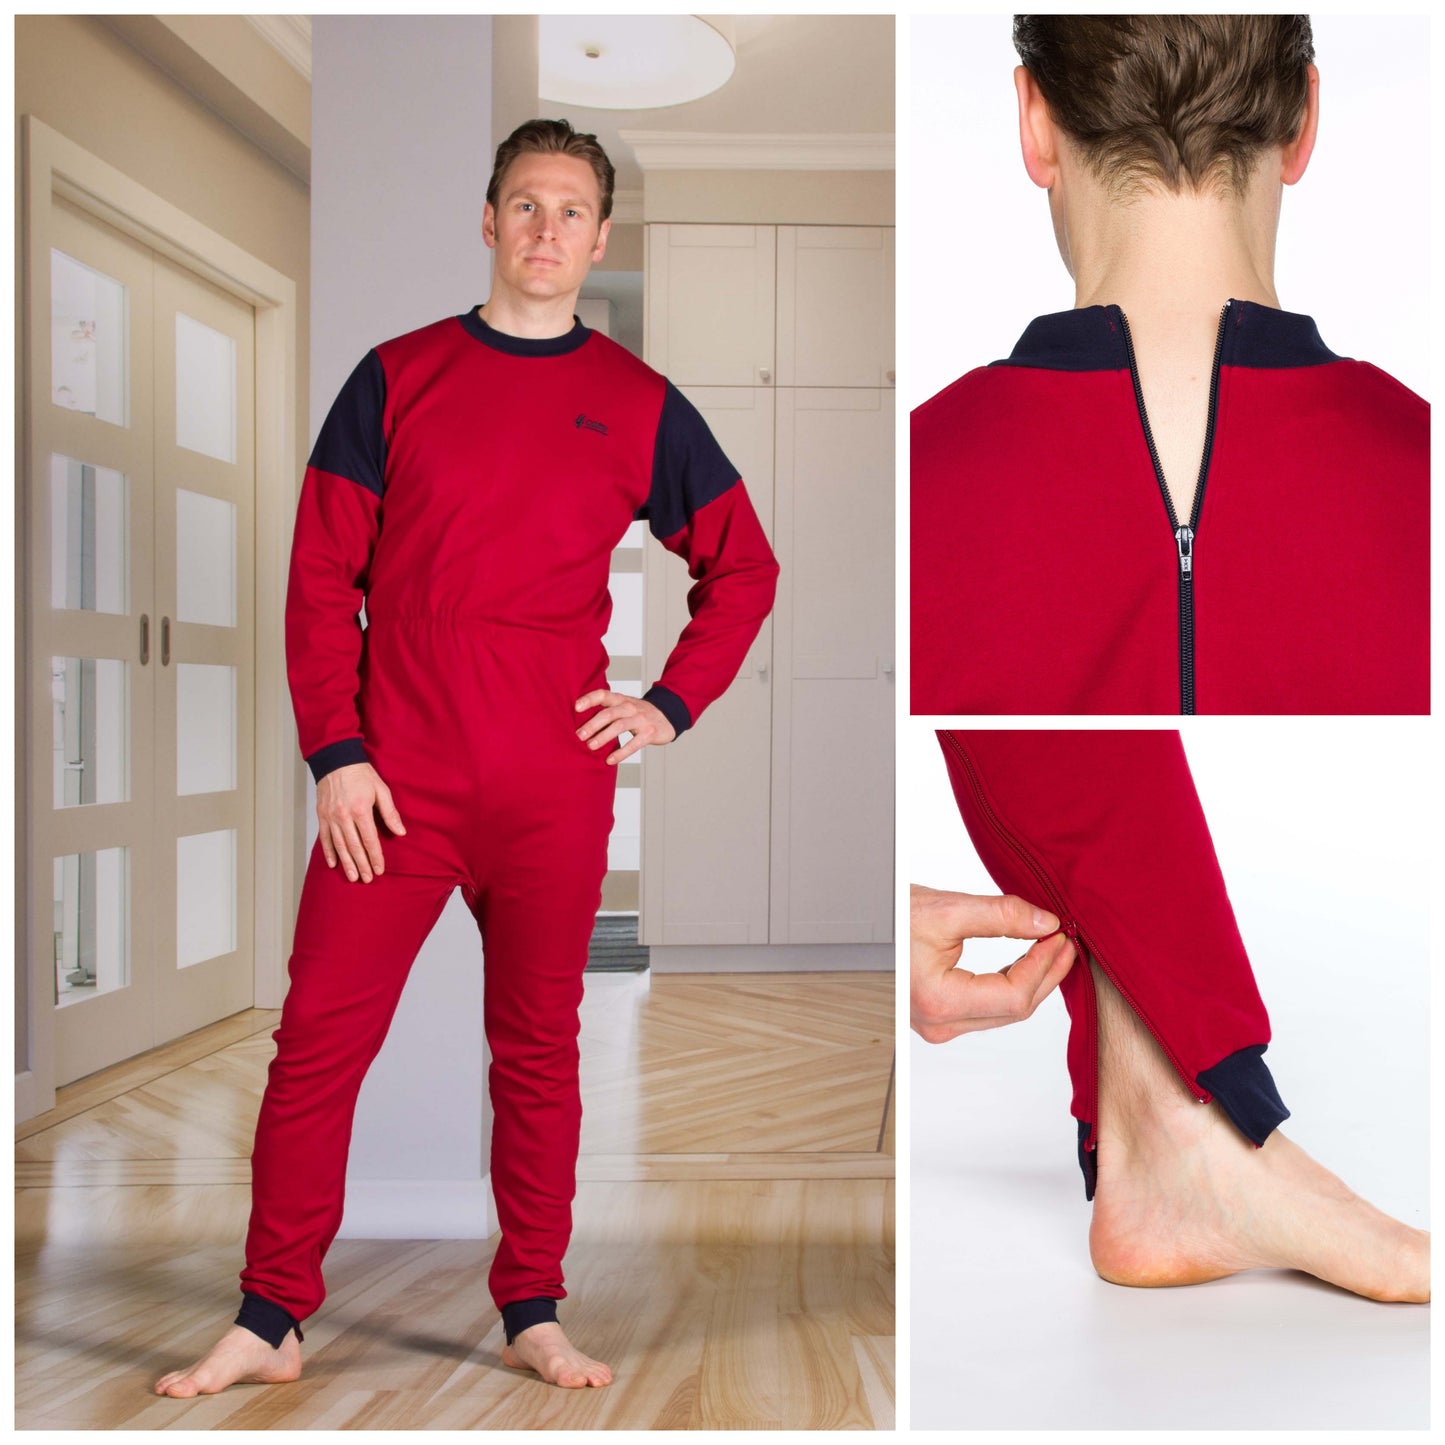 Unisex Jumpsuit: Long Sleeves Leggings - Zip Up The Back - Optional Zip In The Crotch (4332)